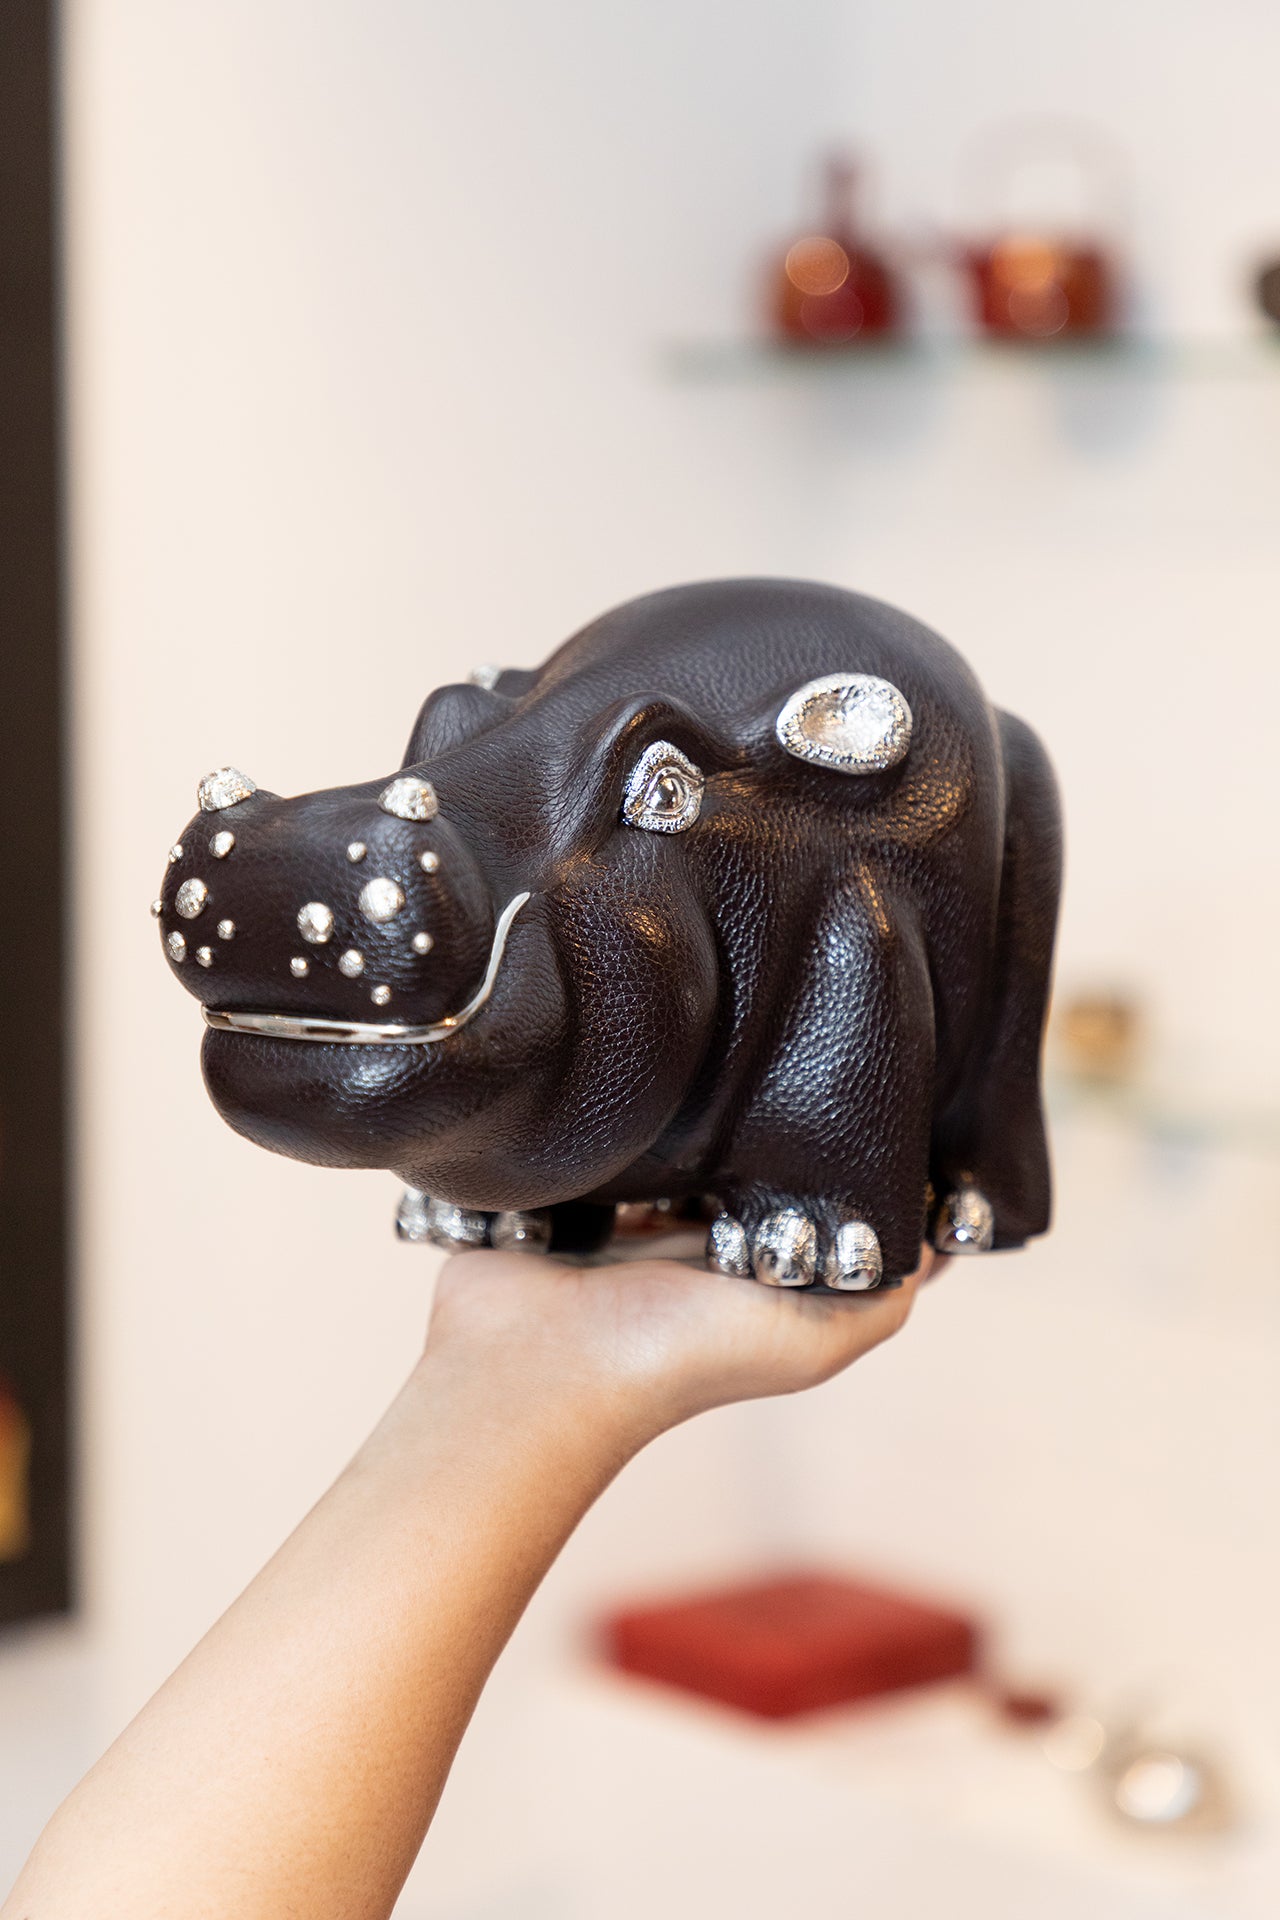 Hippo Paperweight / Bookend